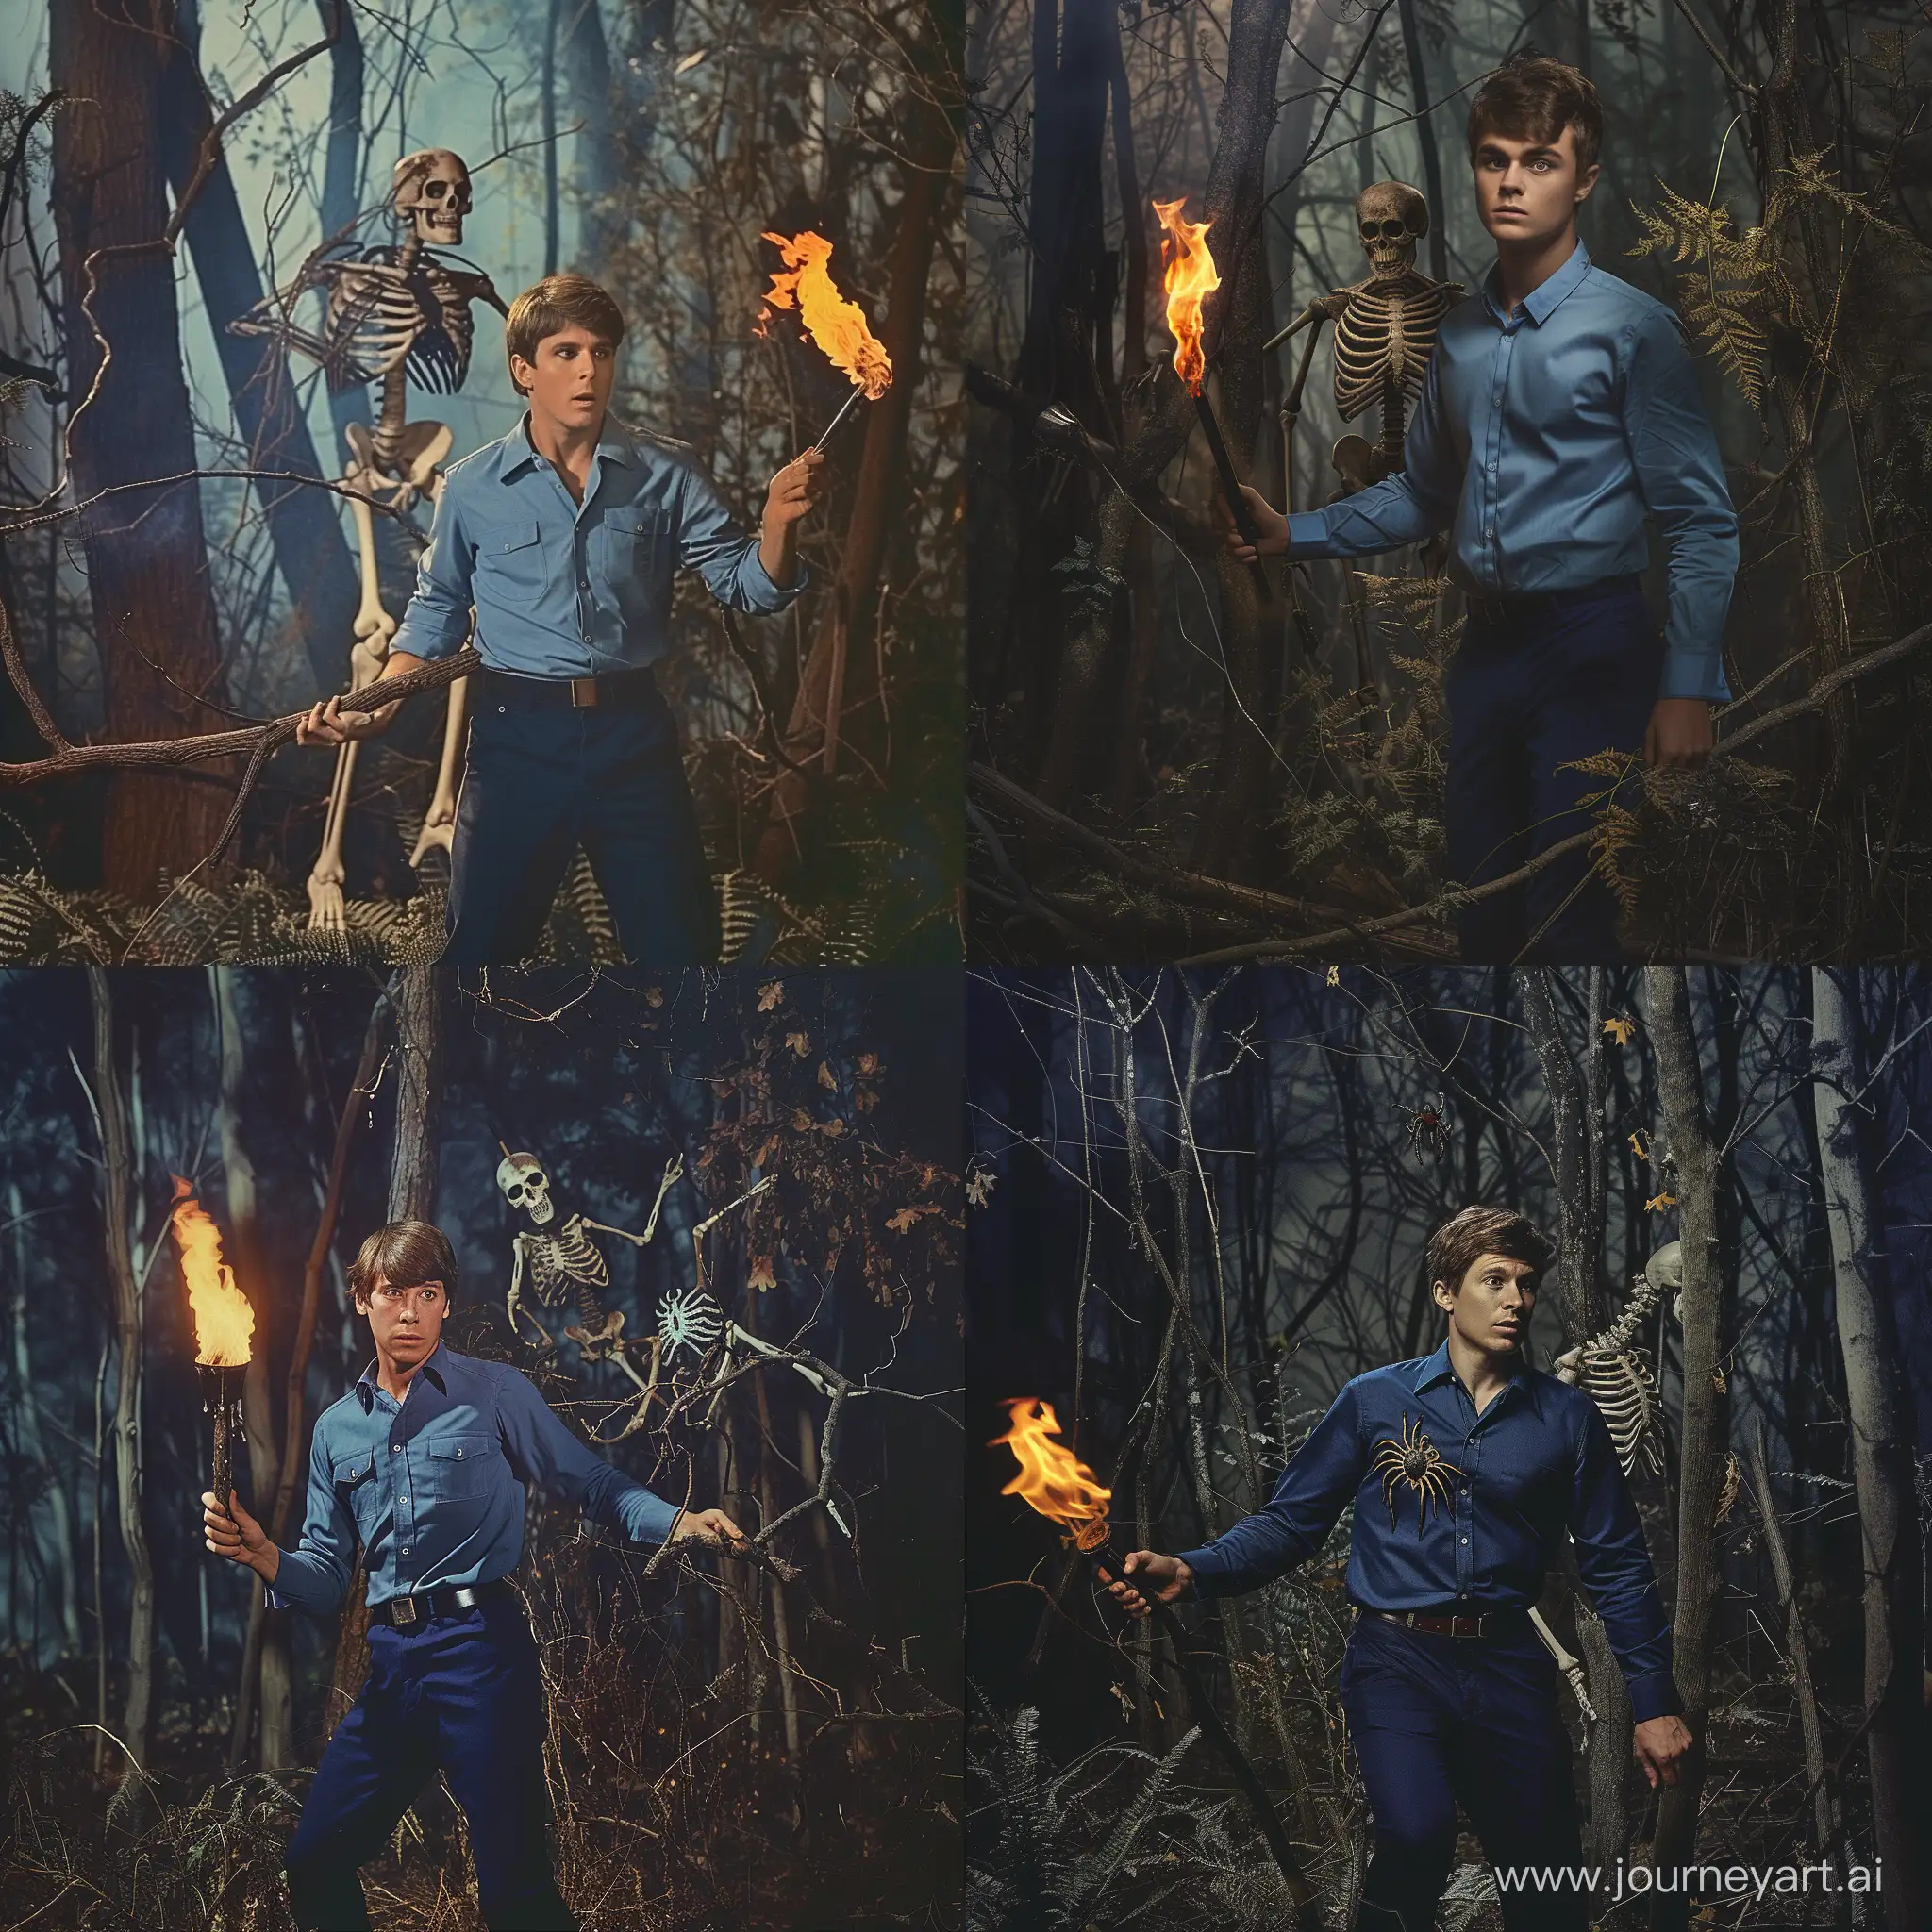 A 20 years old man in blue shirt and navy blue pants in a forest with a fire torch in hand, dark forest trees with no leaves, very dense forest, very big spider on branch with a skeleton behind the man, 1970s style dark fantasy theme.